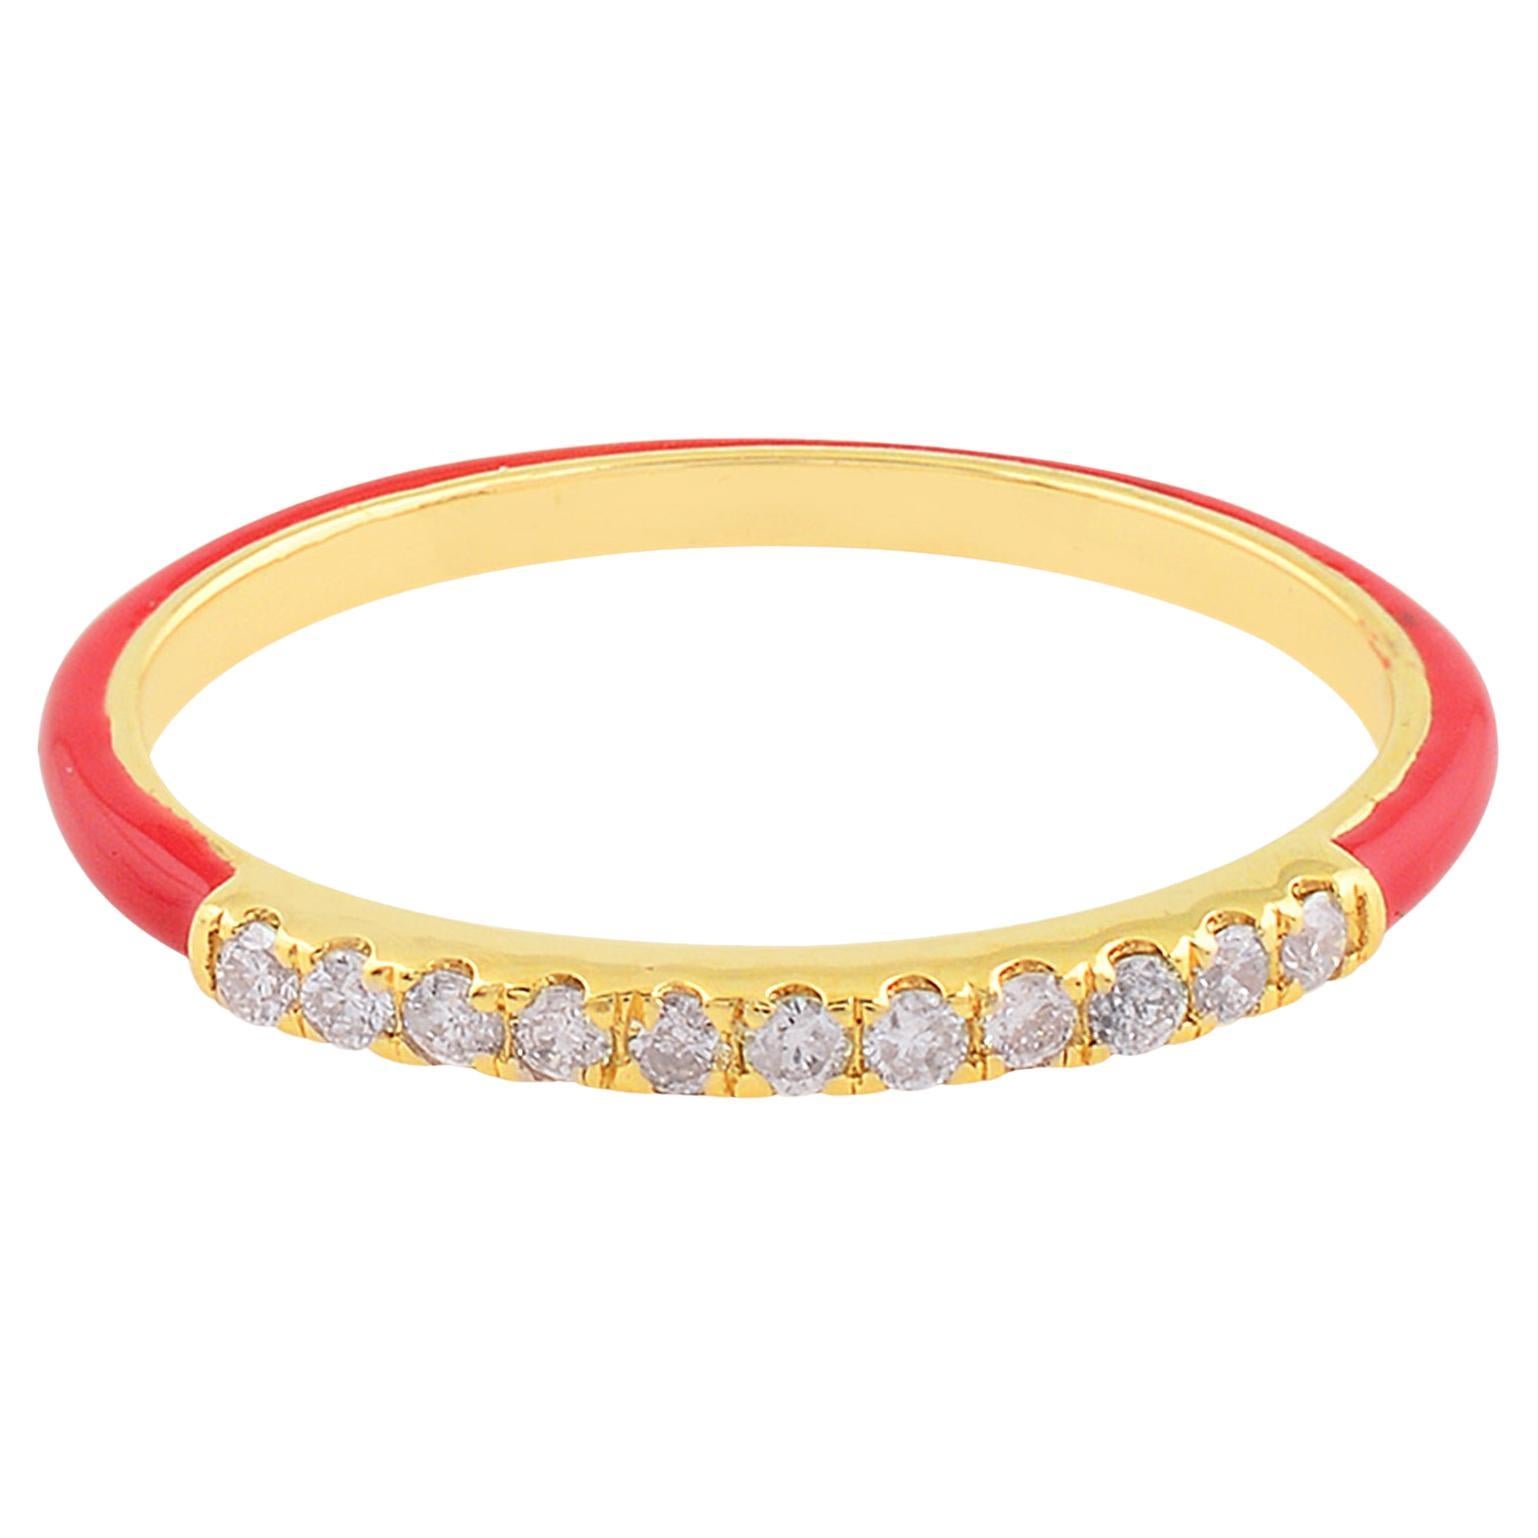 0.14 Carat SI Clarity HI Color Diamond Pave Red Enamel Band Ring 14k Yellow Gold For Sale